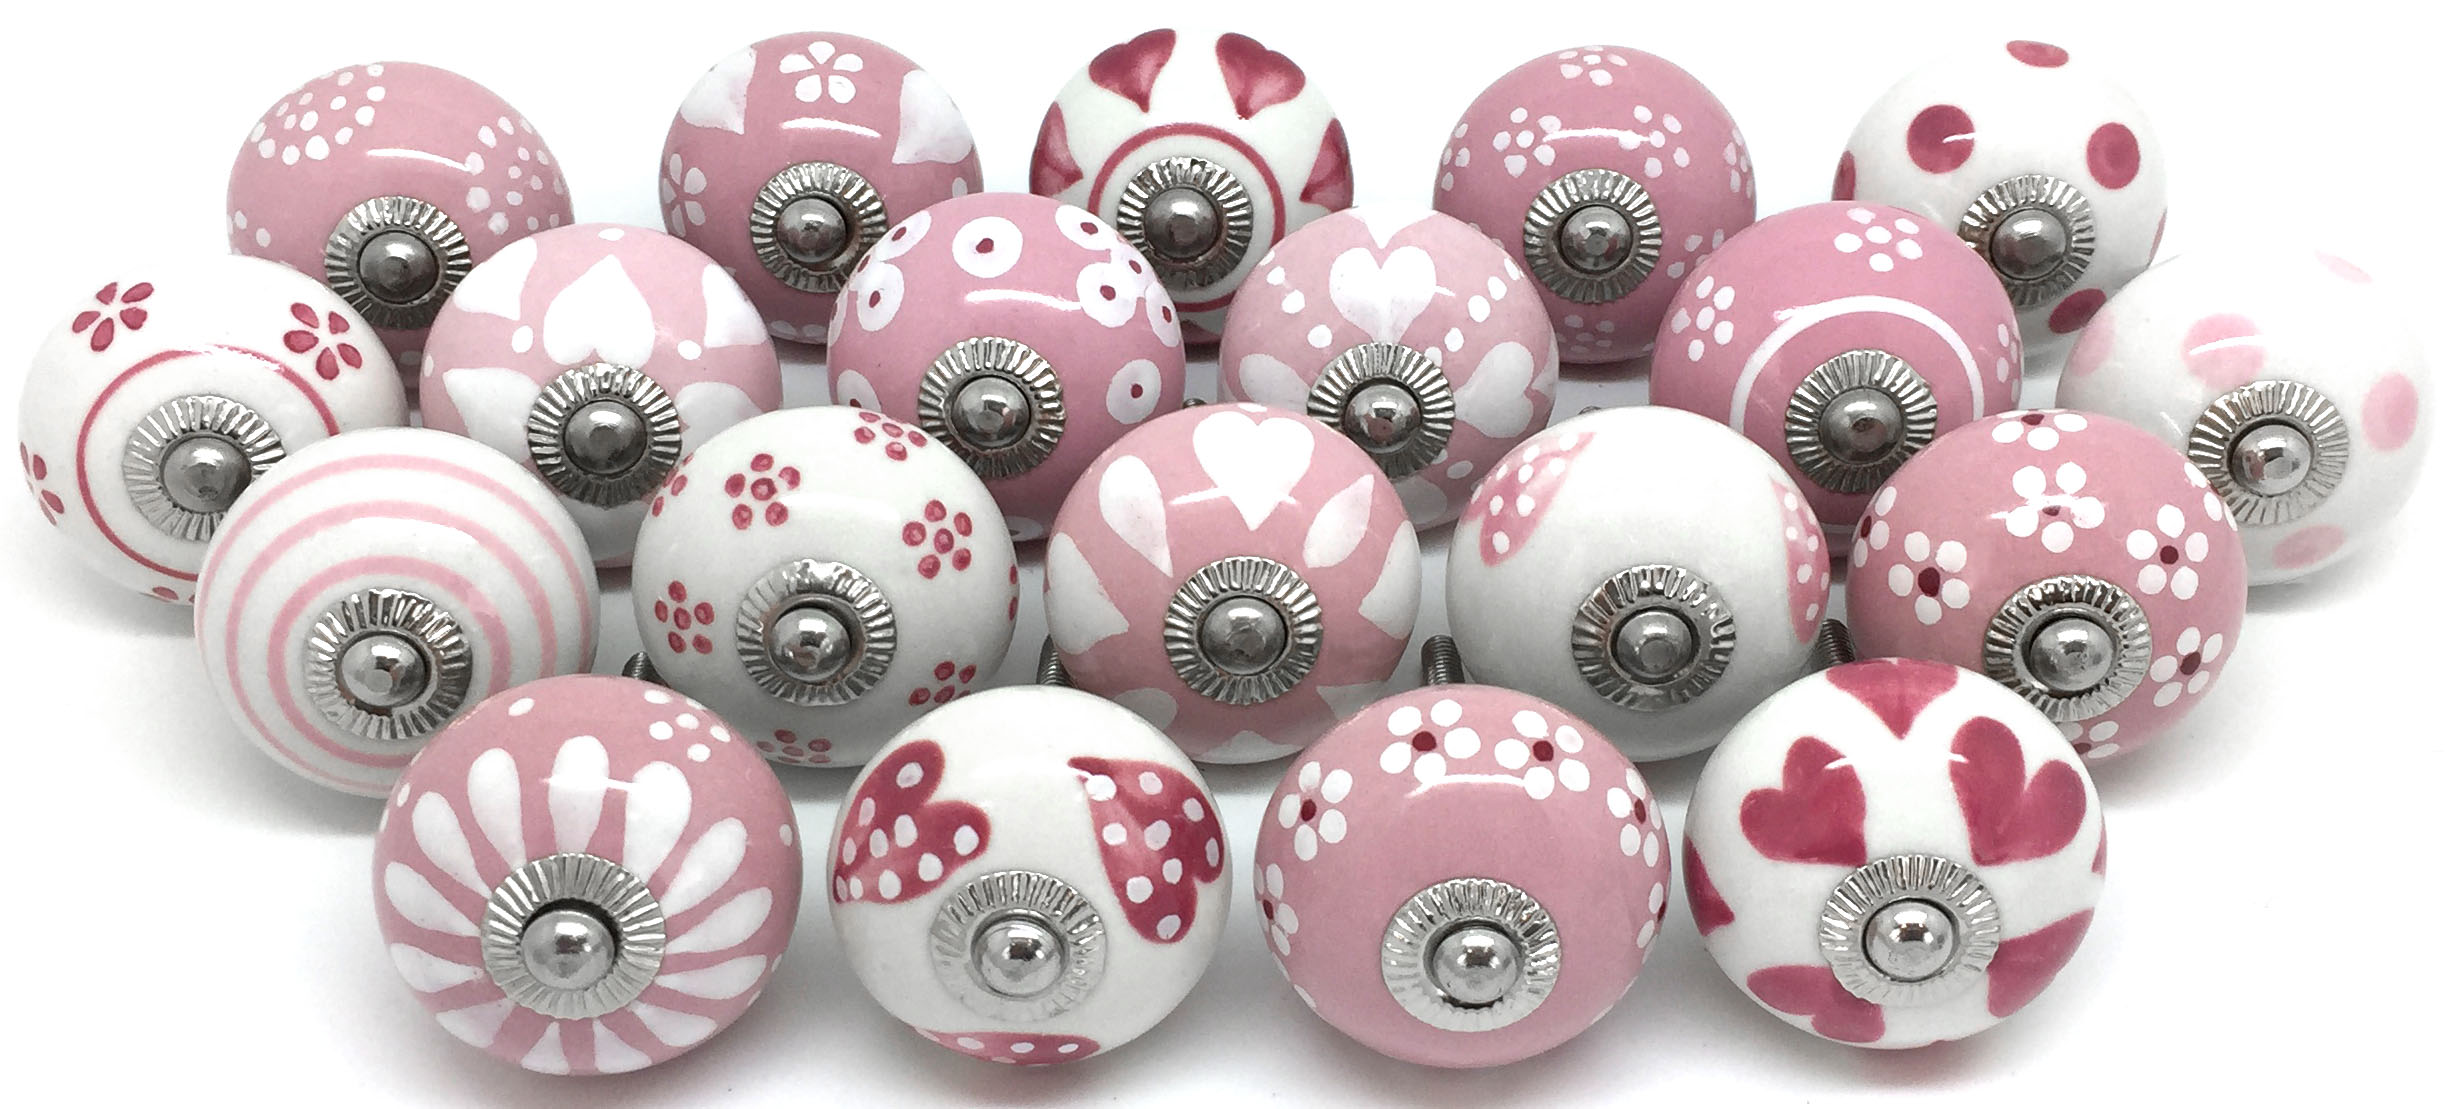 We've Updated Our Lovely Set of 20 Pinks!